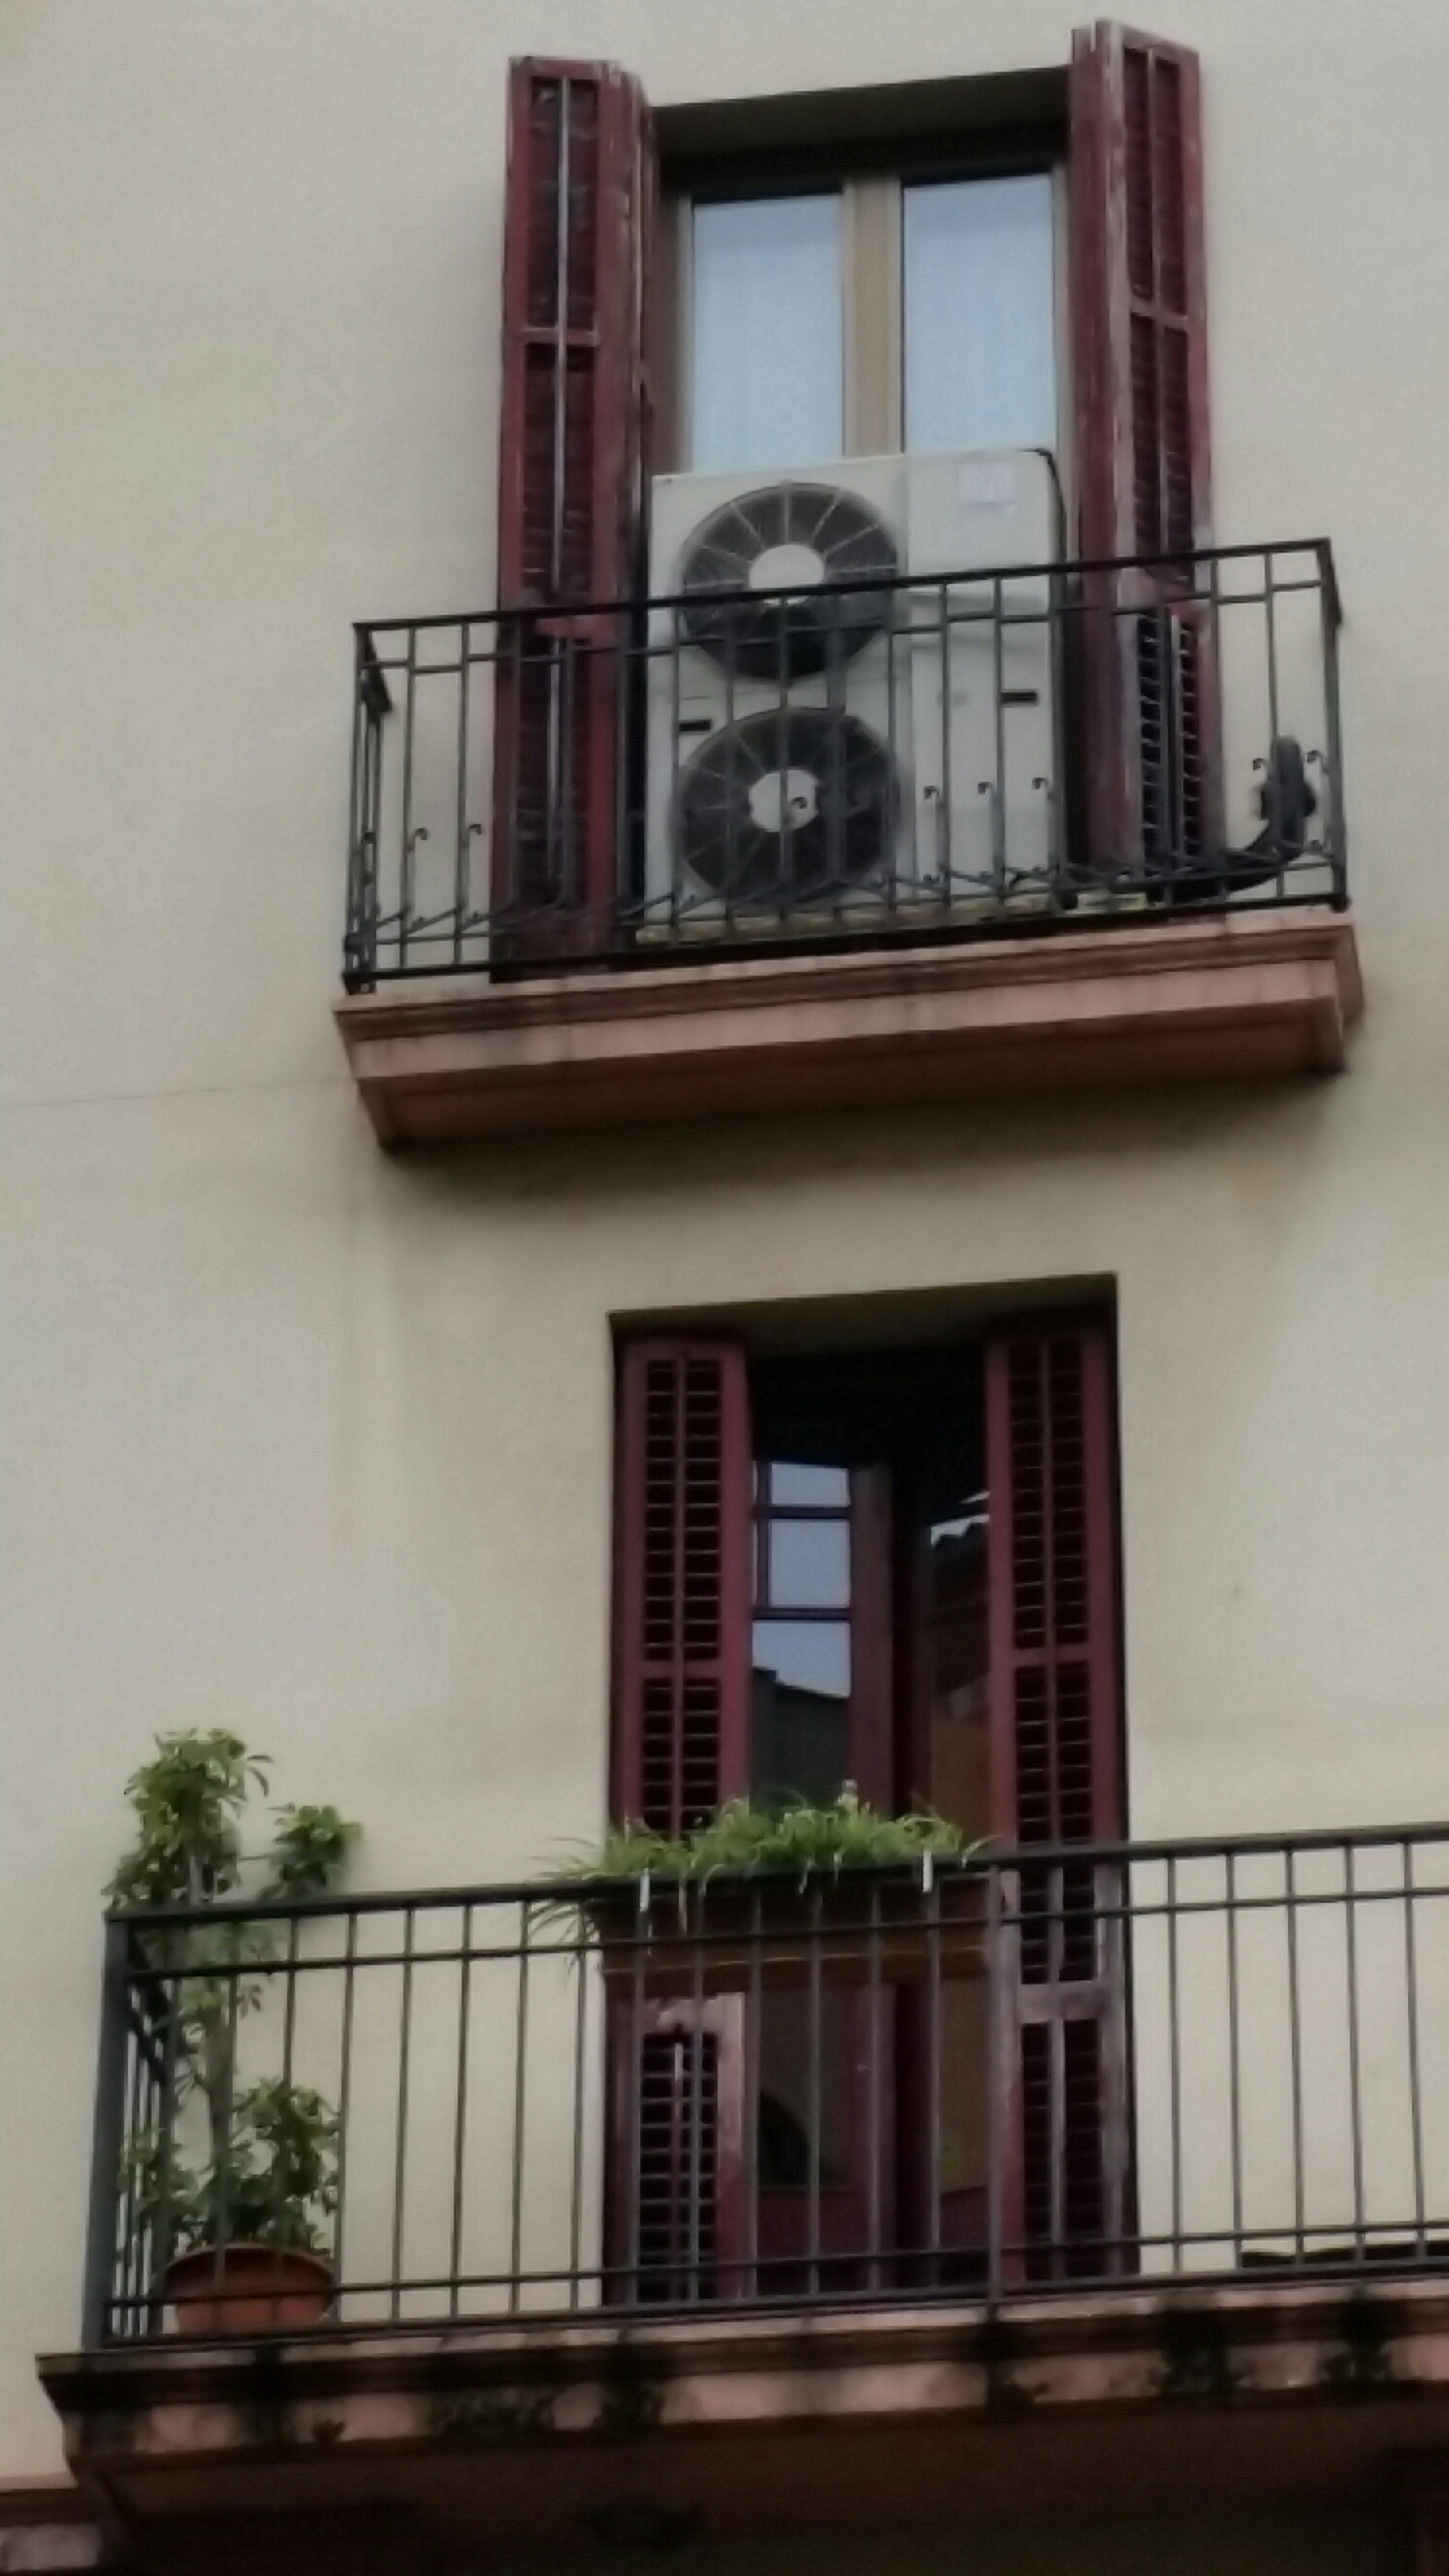 Not a good example of mini split condenser on a Spanish balcony